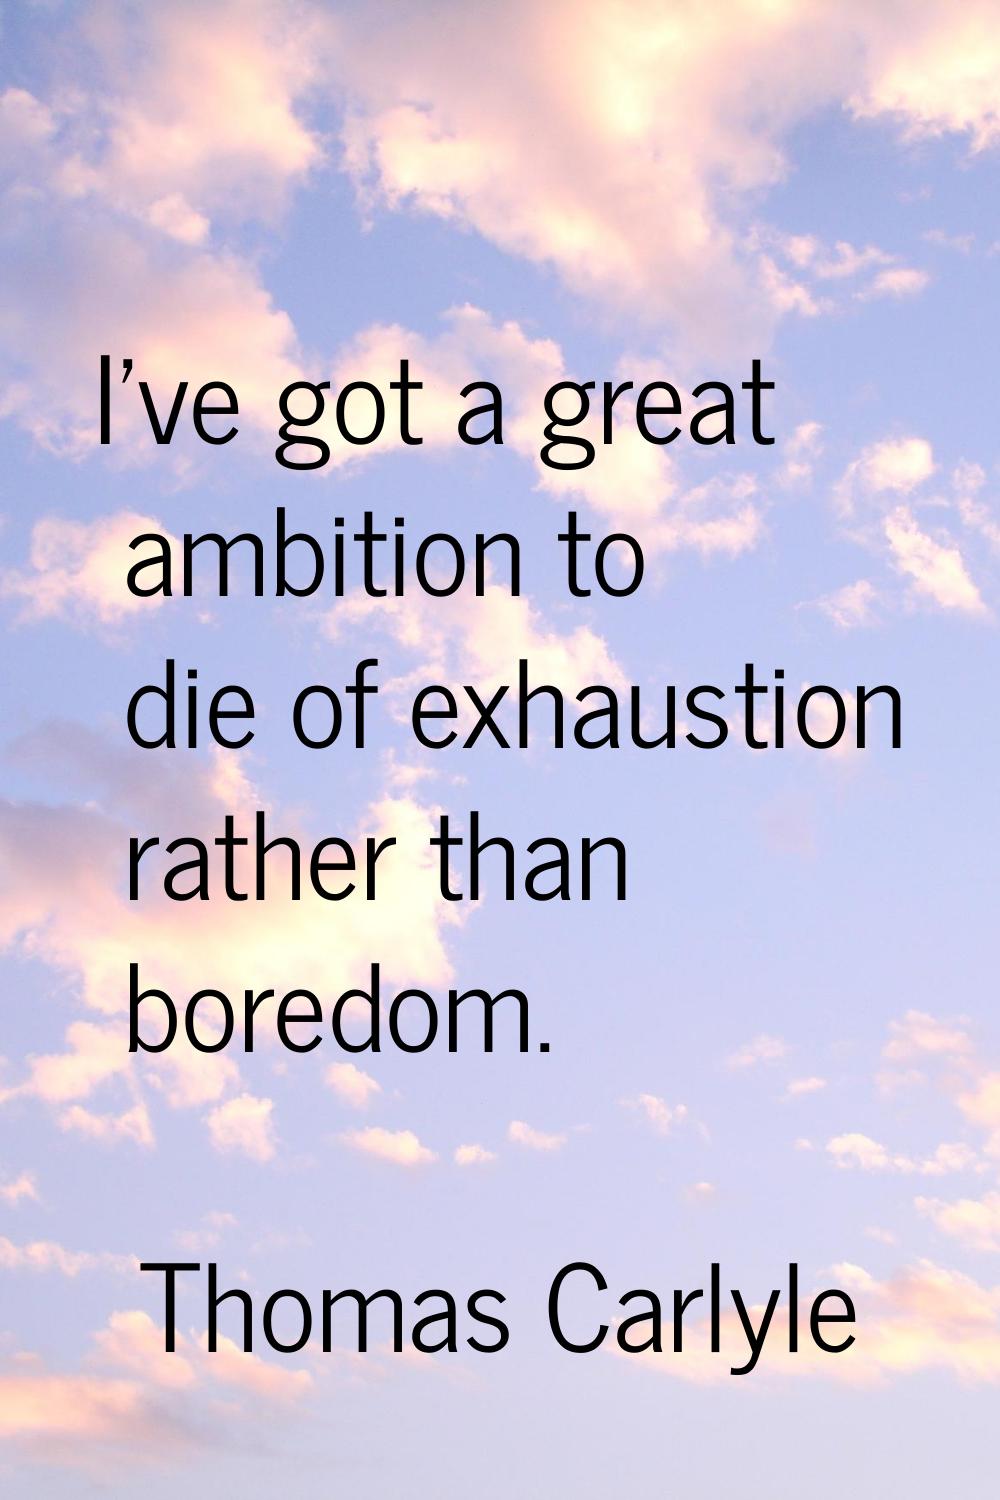 I've got a great ambition to die of exhaustion rather than boredom.